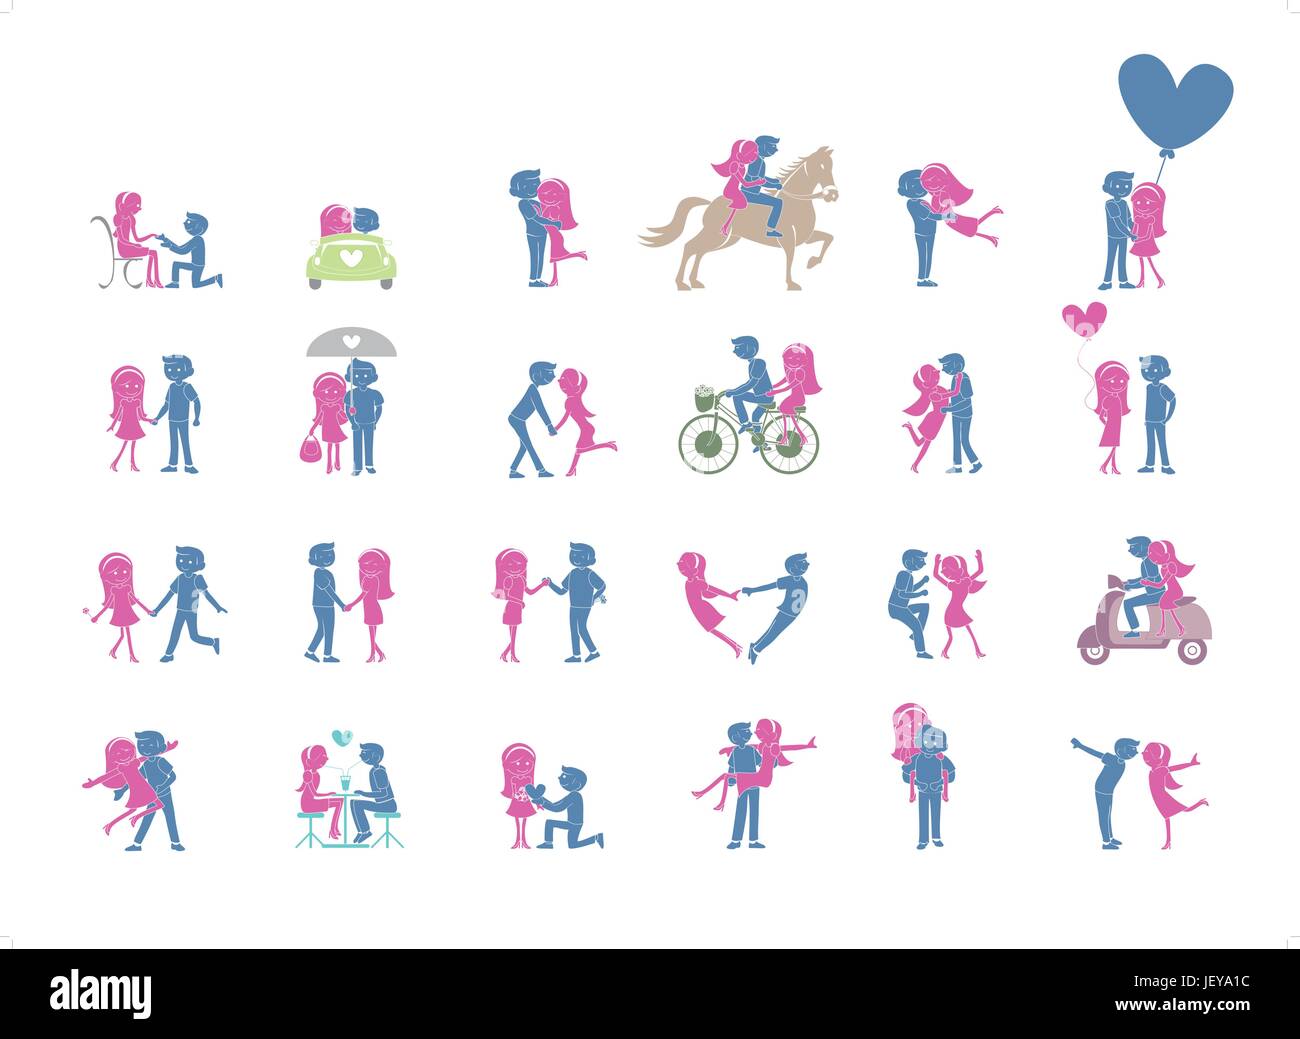 guy, woman, blue, humans, human beings, people, folk, persons, human, human Stock Vector